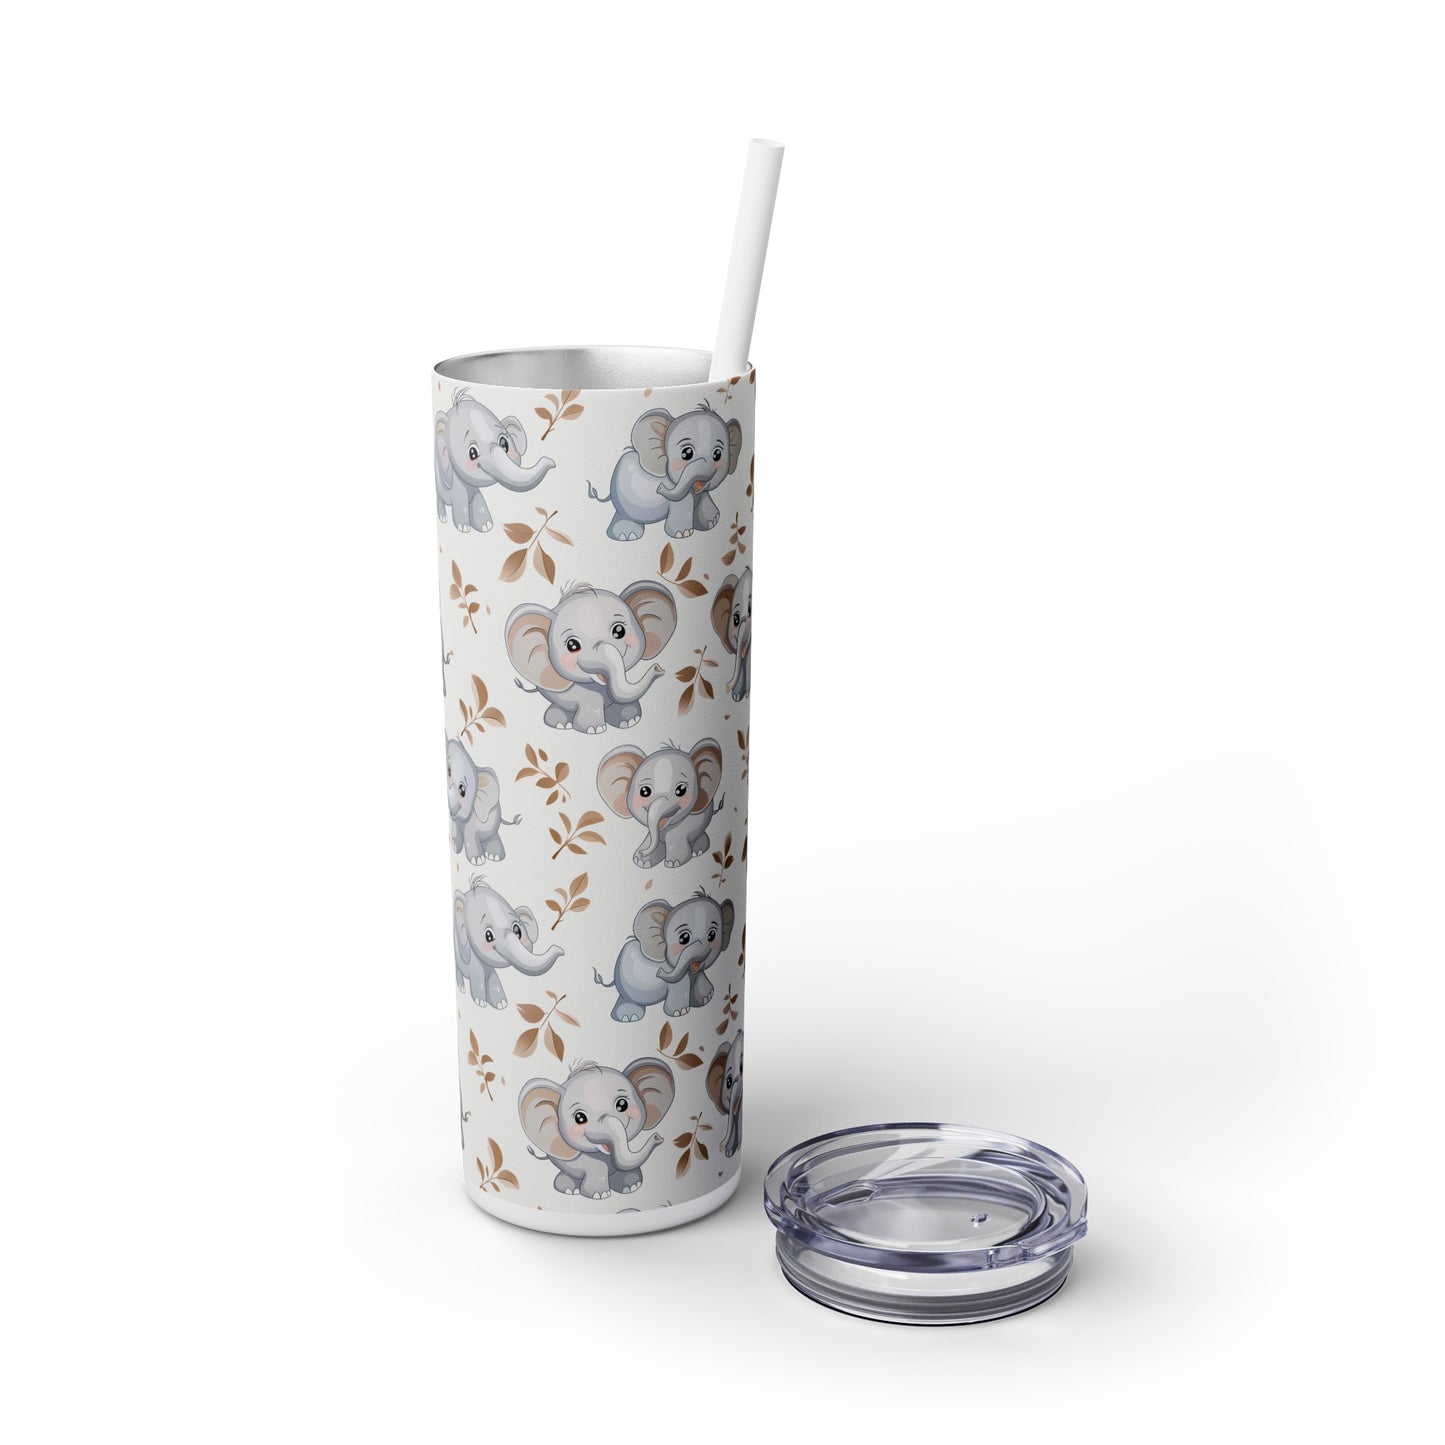 Insulated 20 oz Tumbler with Lid & Straw, Cute Baby Elephants - Double-walled Stainless Steel, Keeps Drinks Hot or Cold